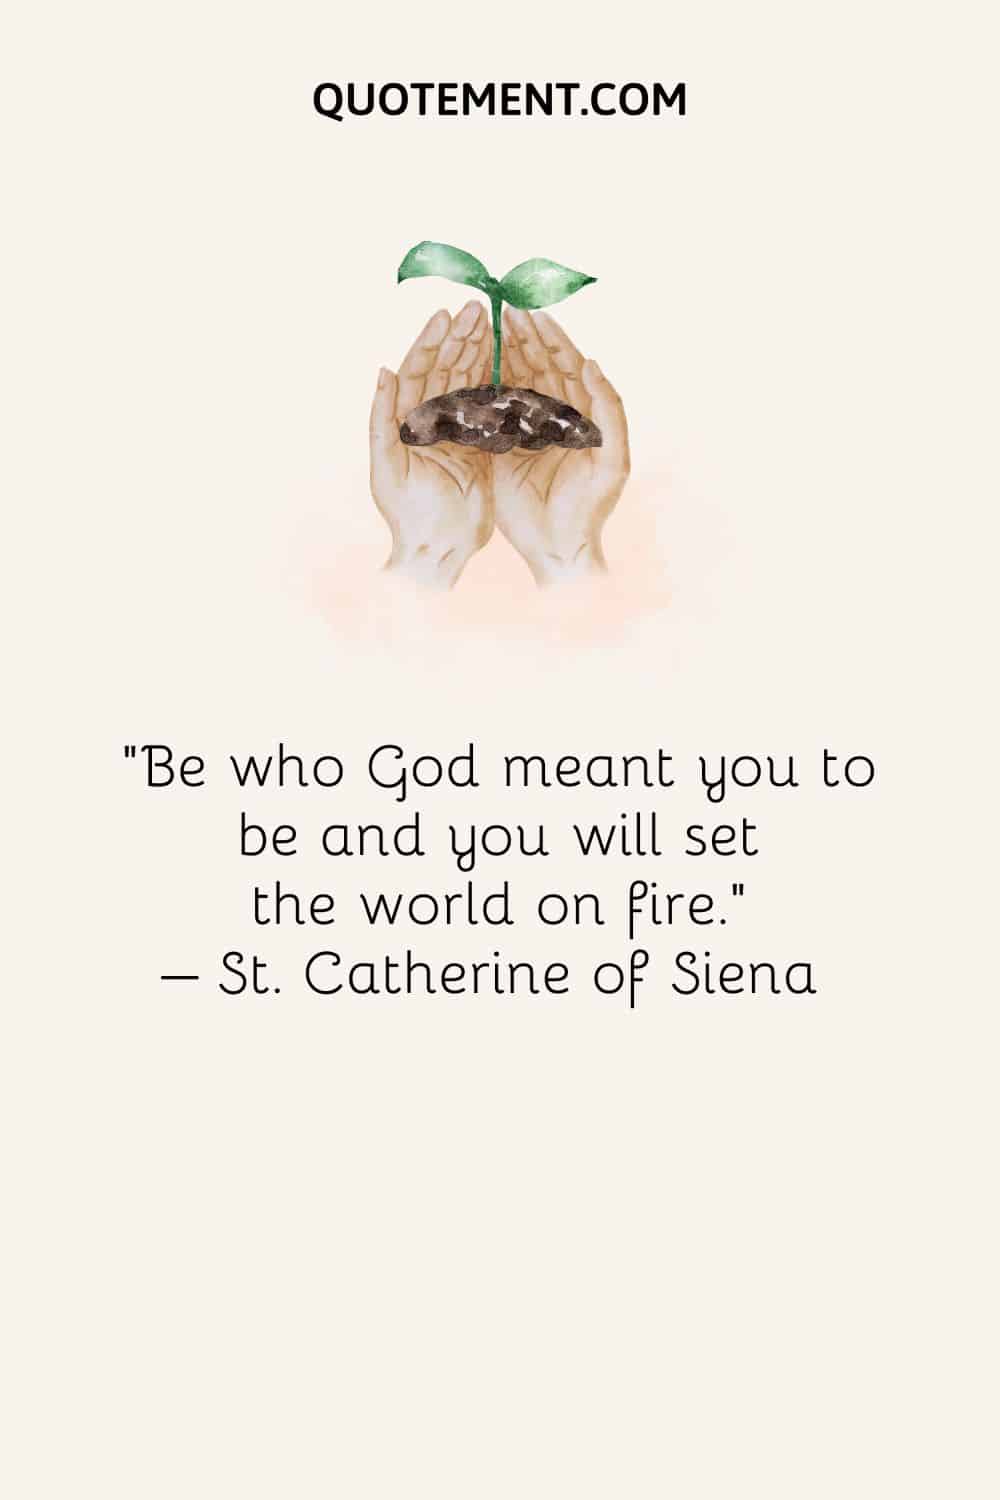 Be who God meant you to be